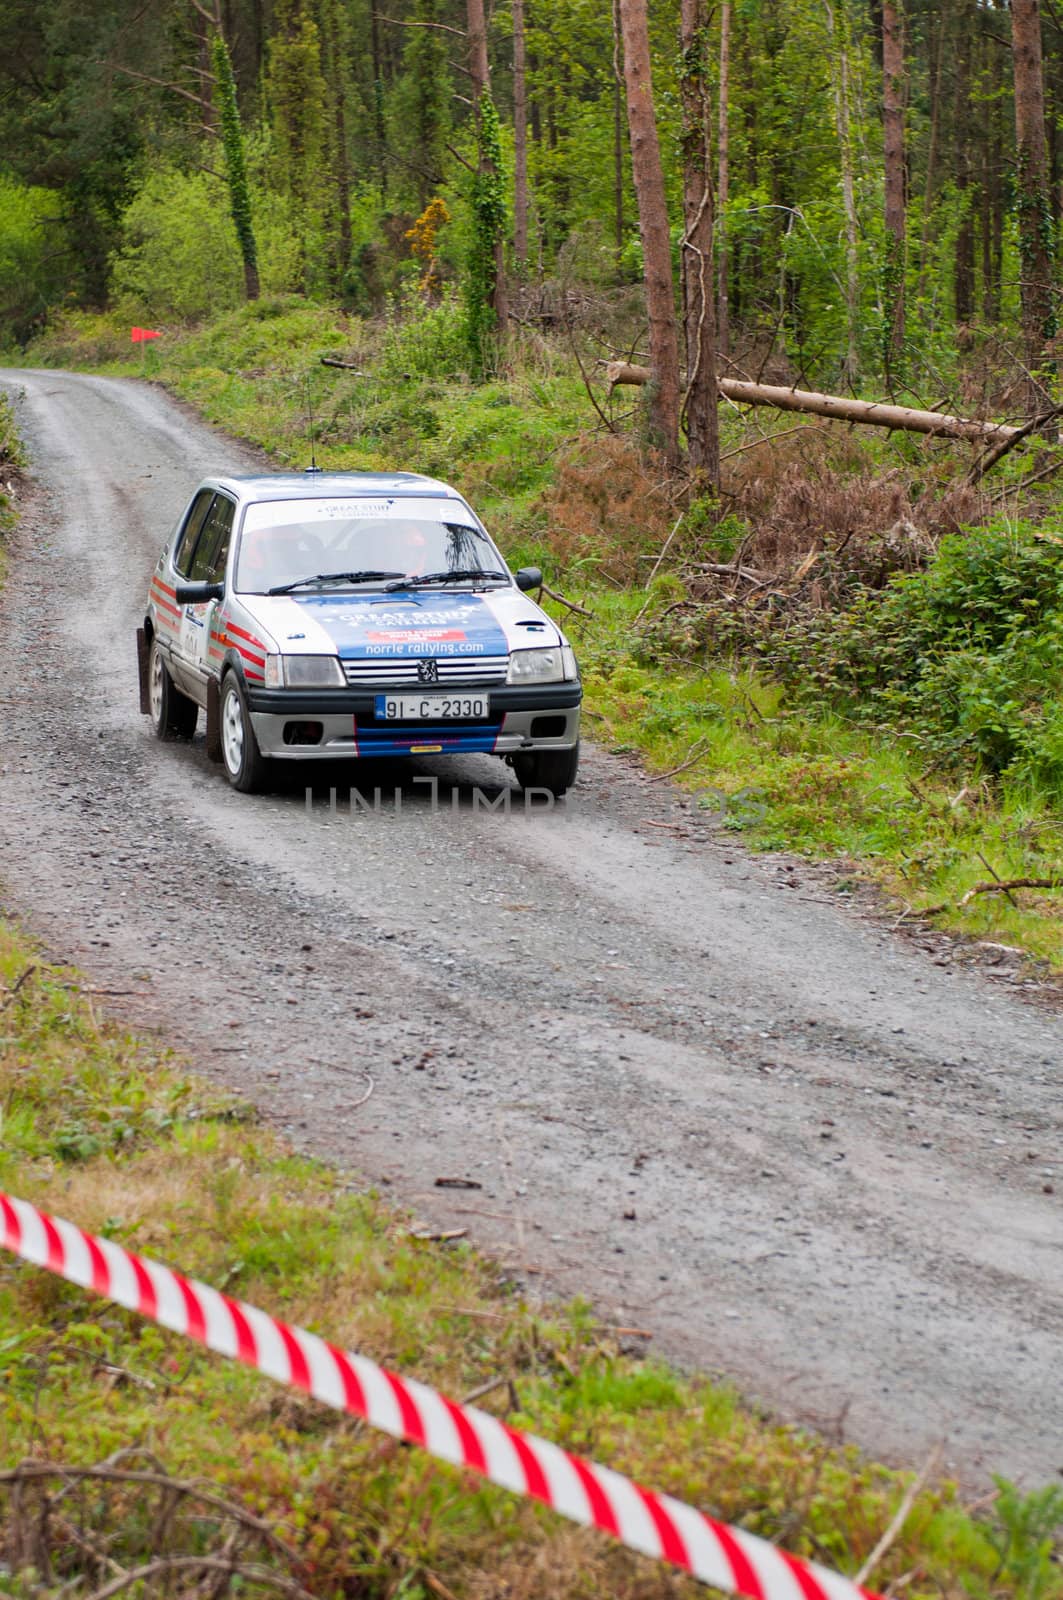 MALLOW, IRELAND - MAY 19: I. Downey driving Opel Corsa at the Jim Walsh Cork Forest Rally on May 19, 2012 in Mallow, Ireland. 4th round of the Valvoline National Forest Rally Championship.  